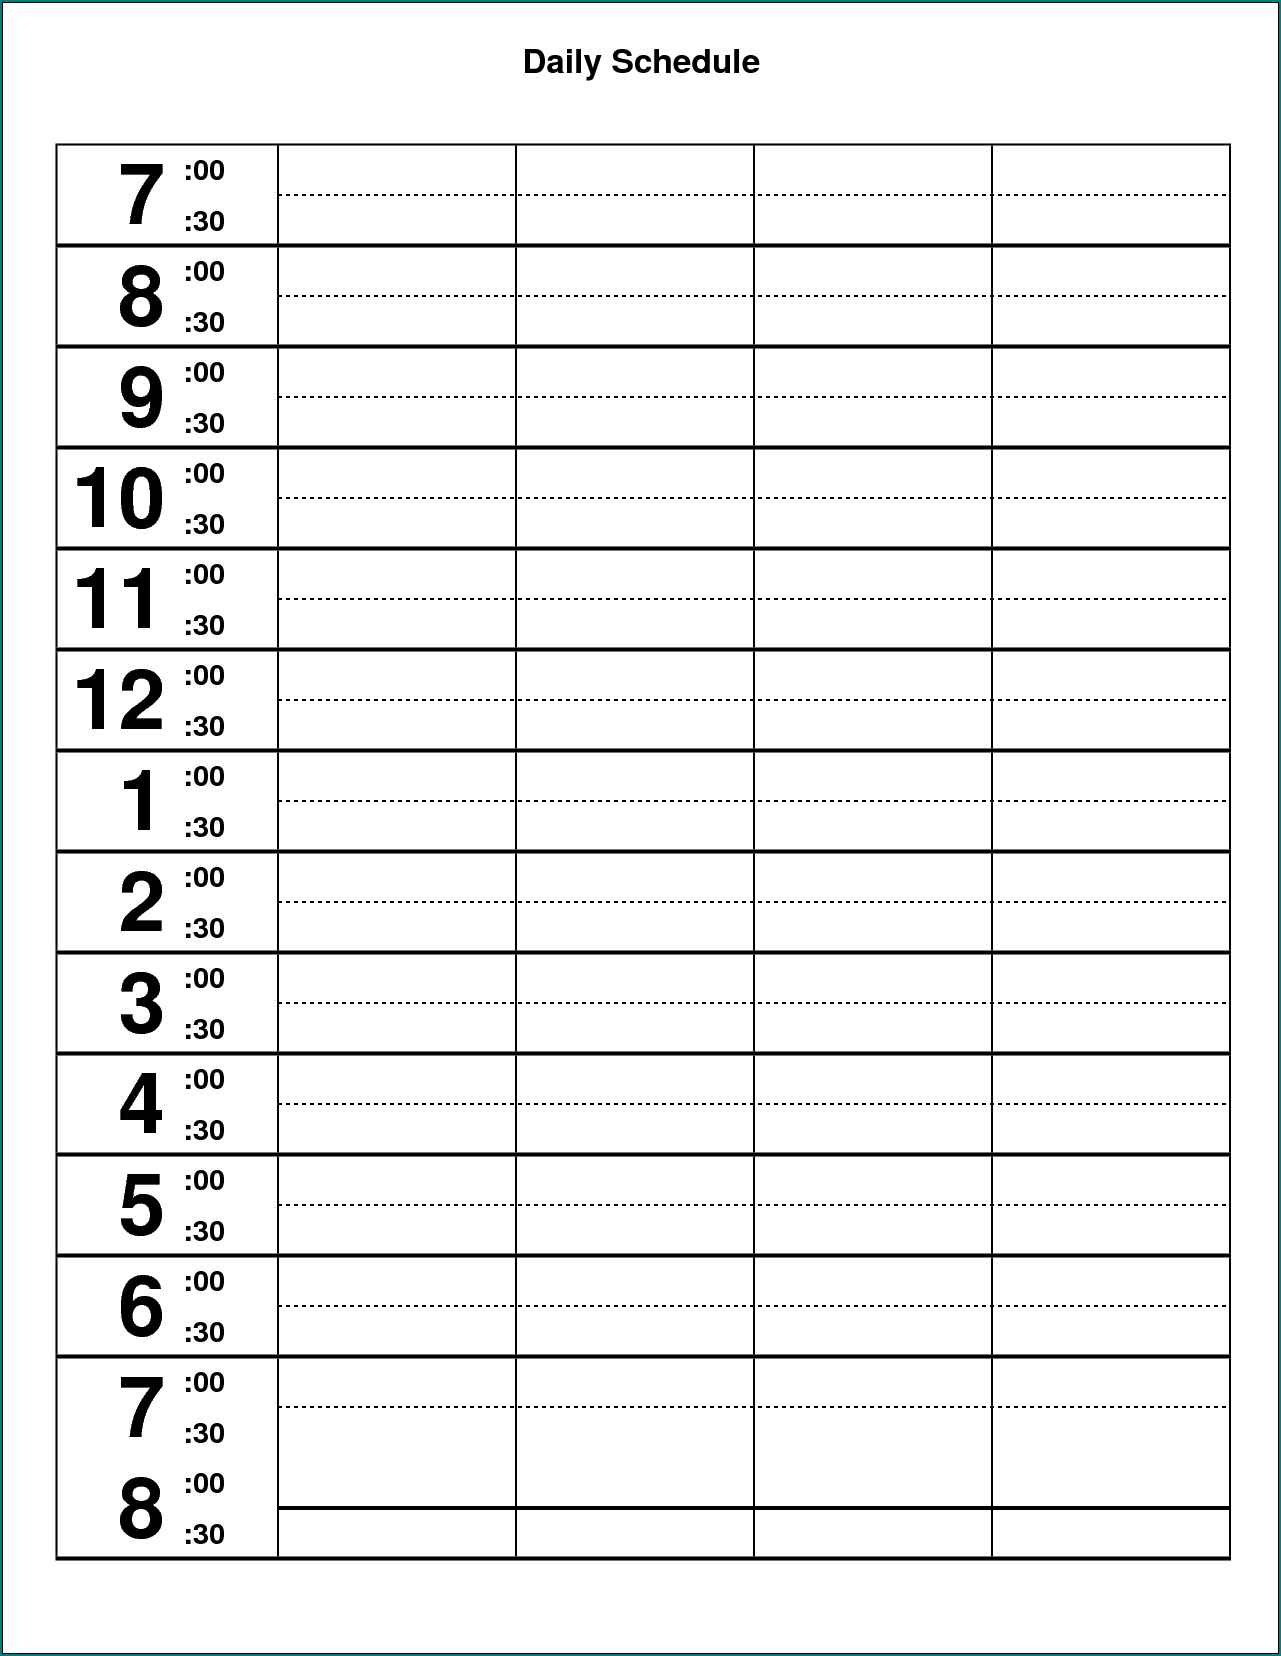 Example of Word Daily Schedule Template